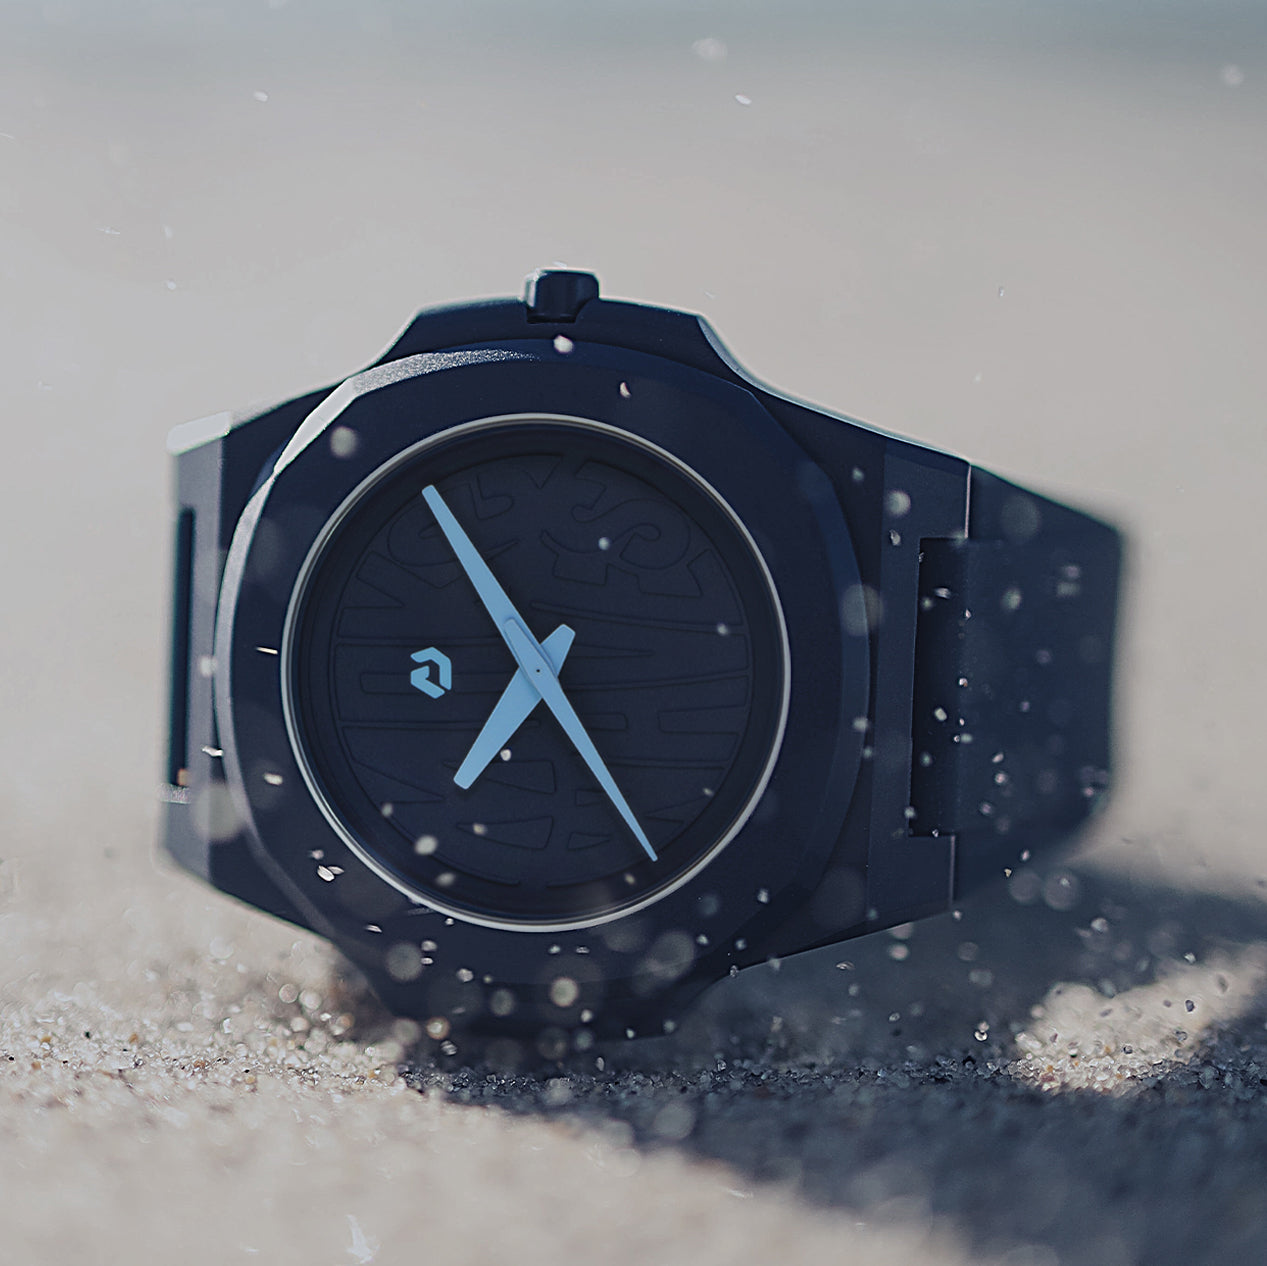 Nuun Official x Cape Clasp Edition Watch